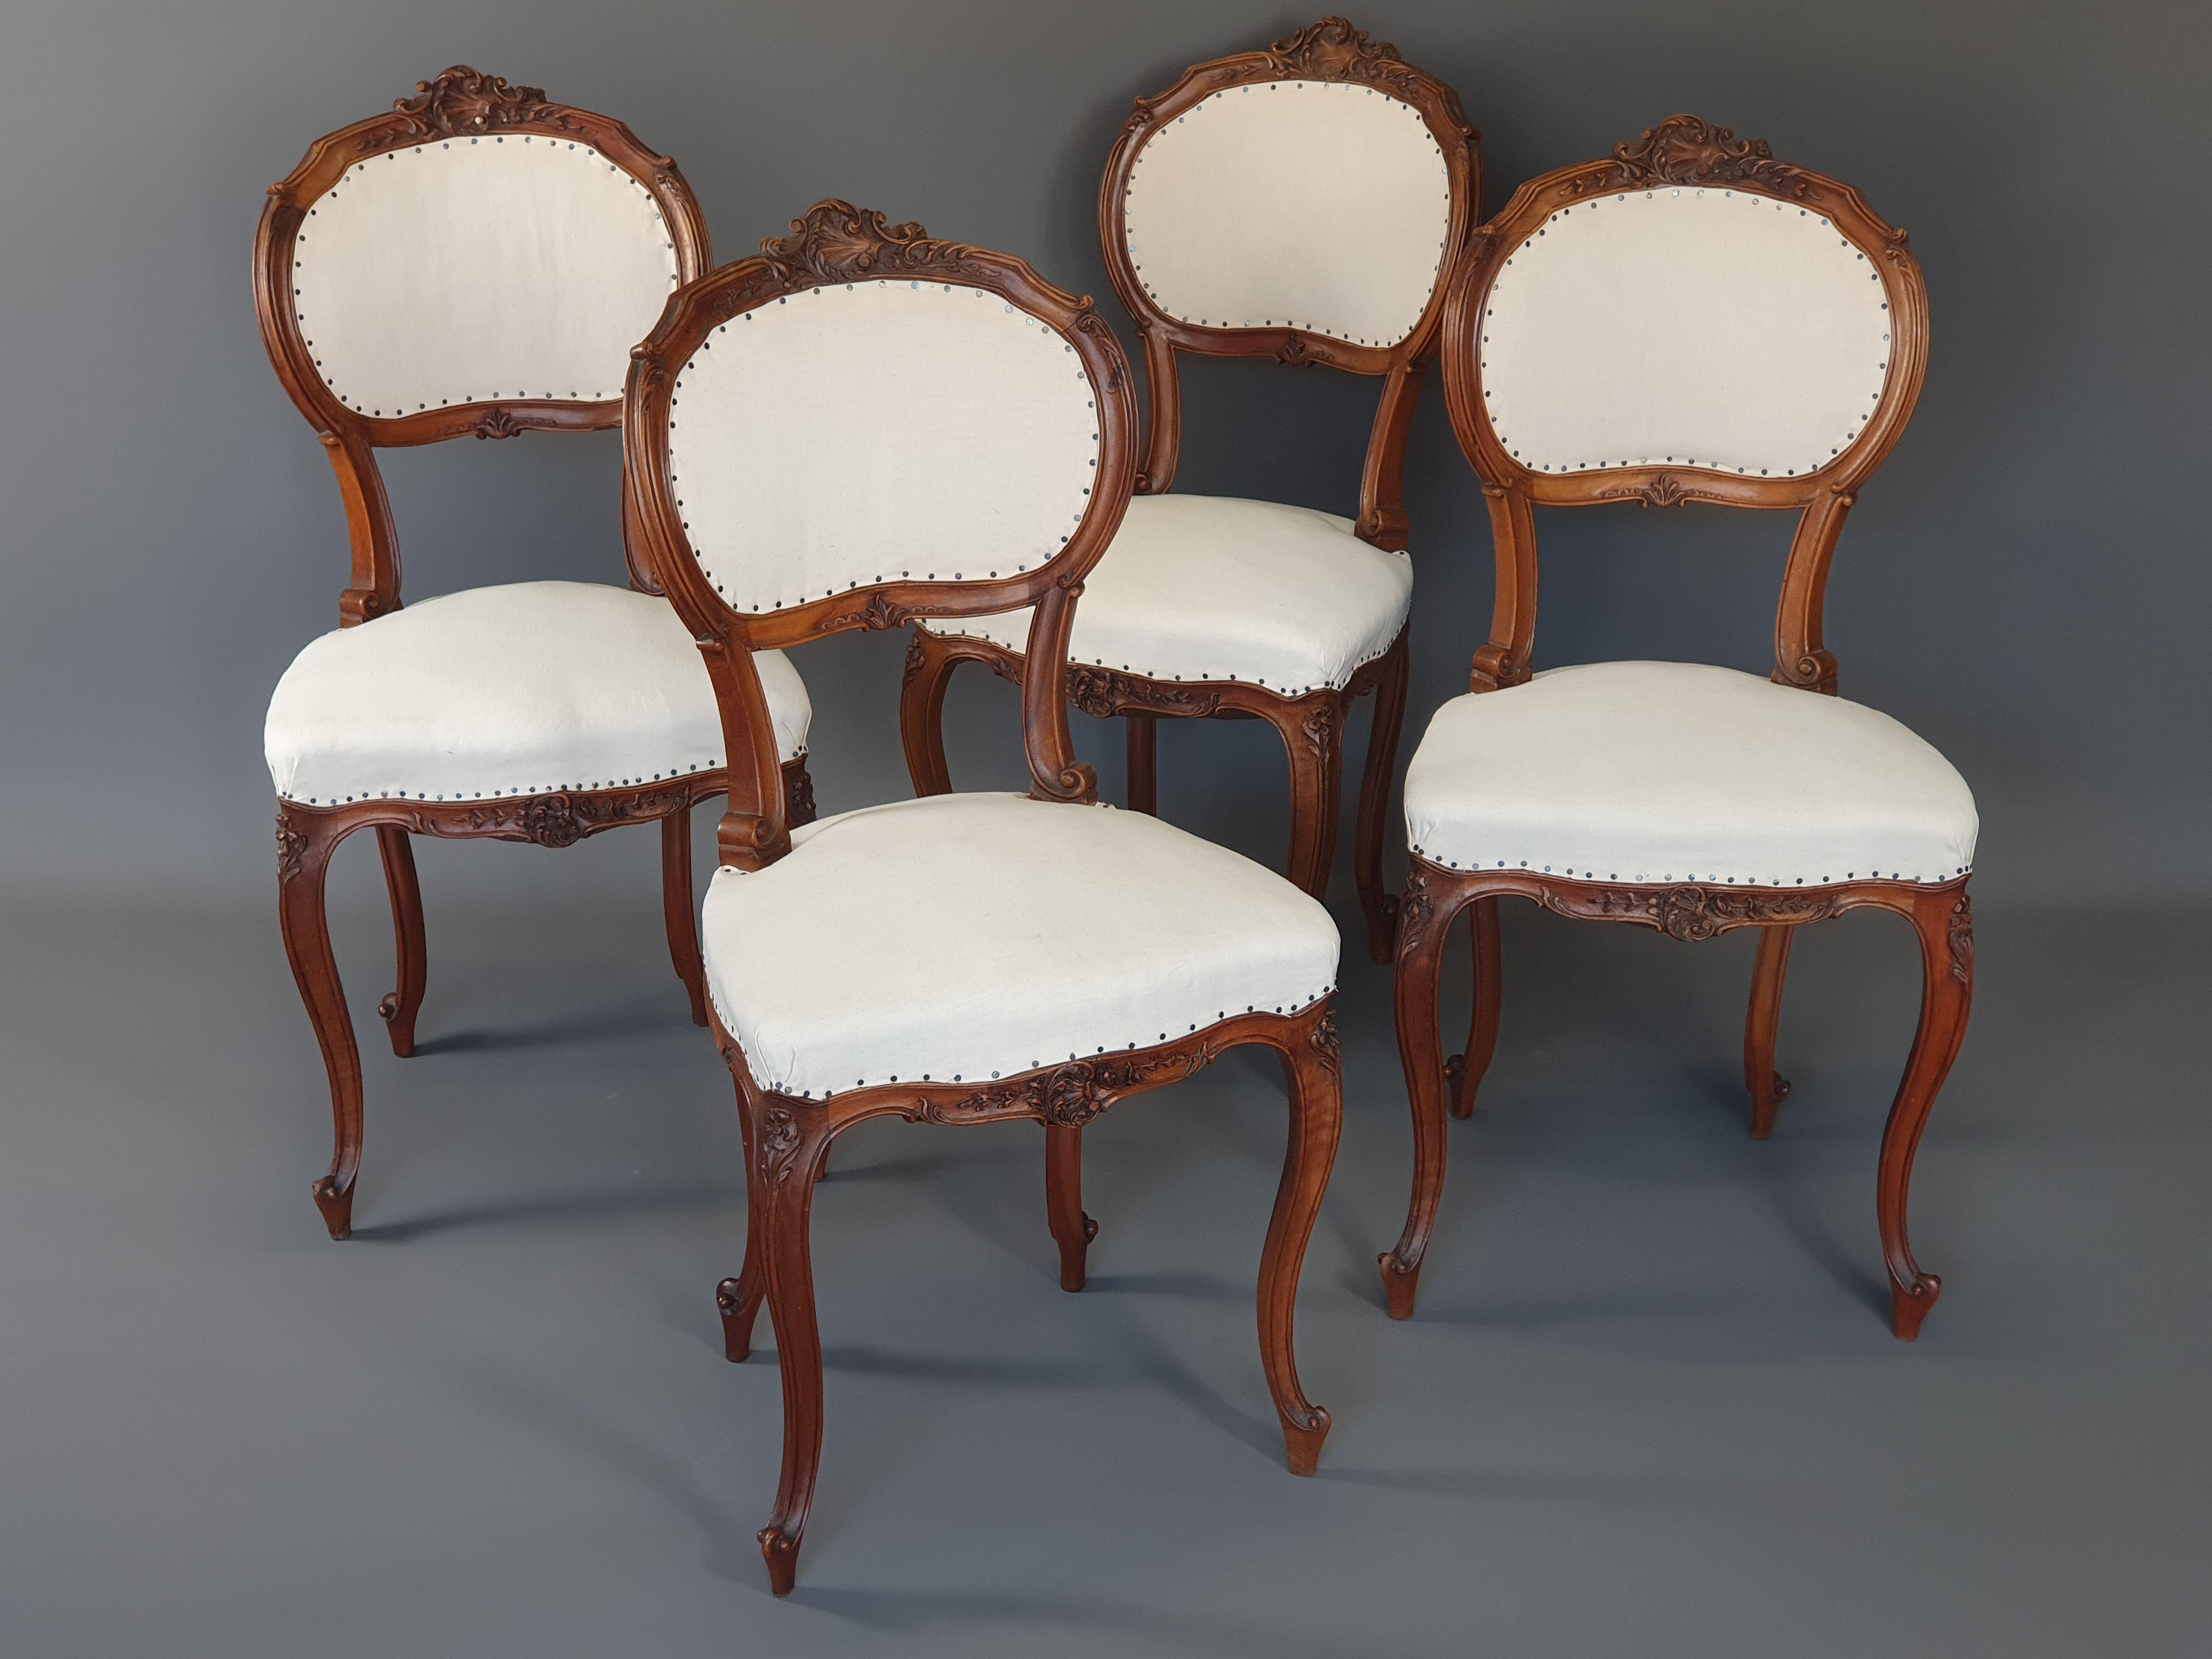 Charming suite of four Louis XV style chairs in solid walnut richly carved with rock-inspired motifs.
Linen and cotton fabric upholstery (so-called Métis fabric of old manufacture but new, never used).

Firm seats in perfect condition.

Very